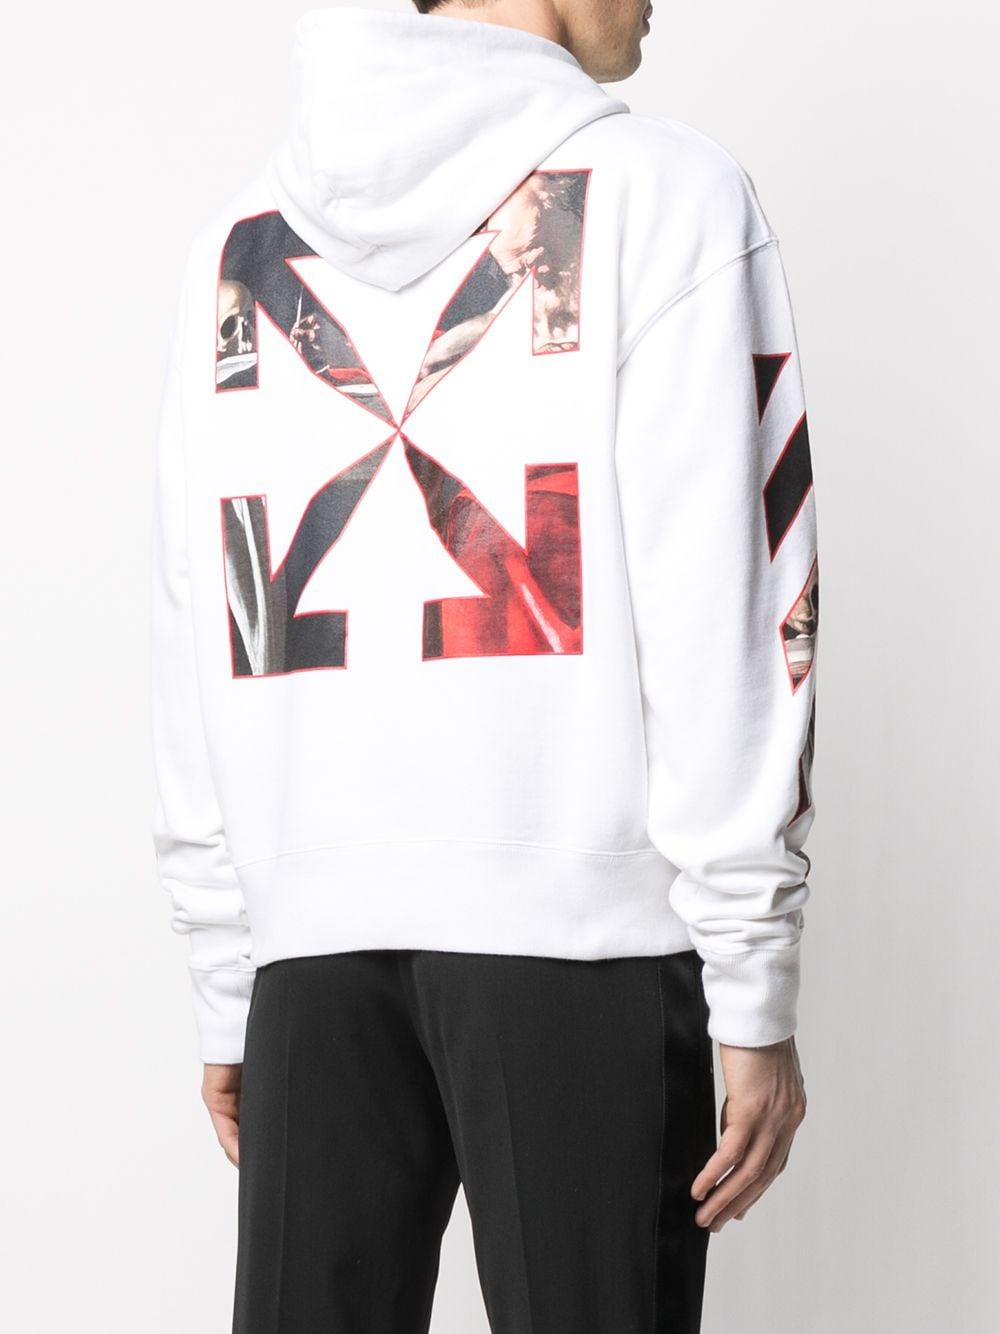 Off-White c/o Virgil Abloh Caravaggio Print Hoodie in White for Men - Lyst